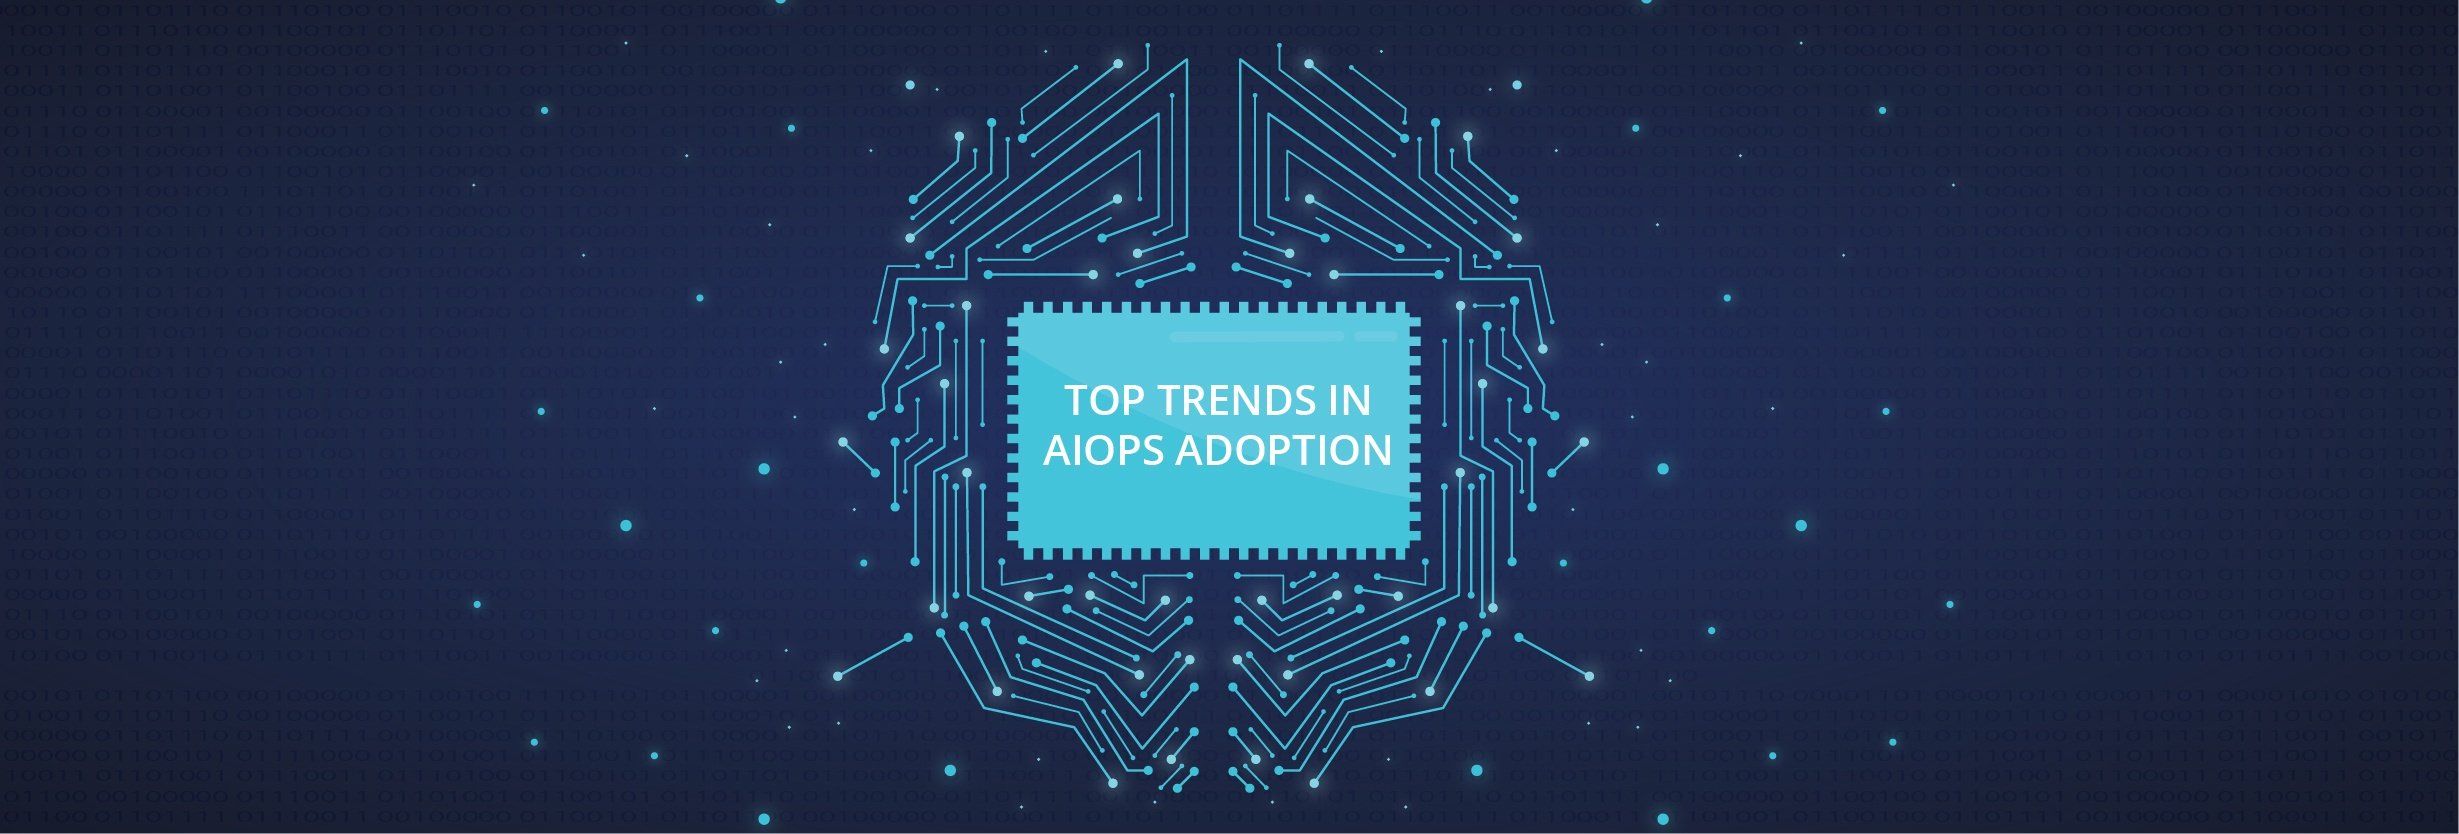 [Report] Top Trends In AIOps Adoption: Four Findings That Explain How Enterprises Are Using AIOps